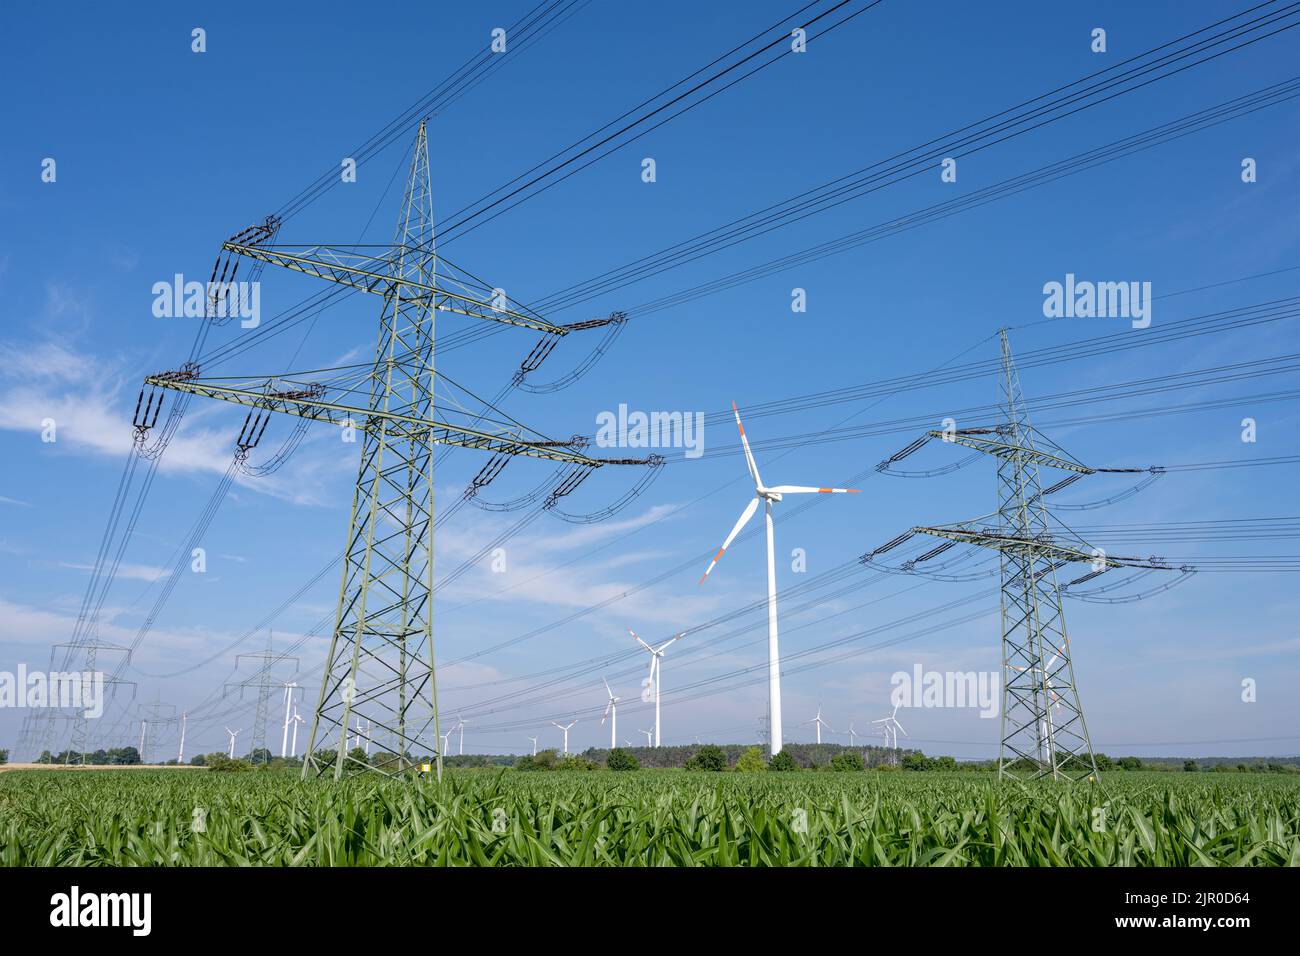 Power lines with wind turbines in the back seen in rural Germany Stock Photo